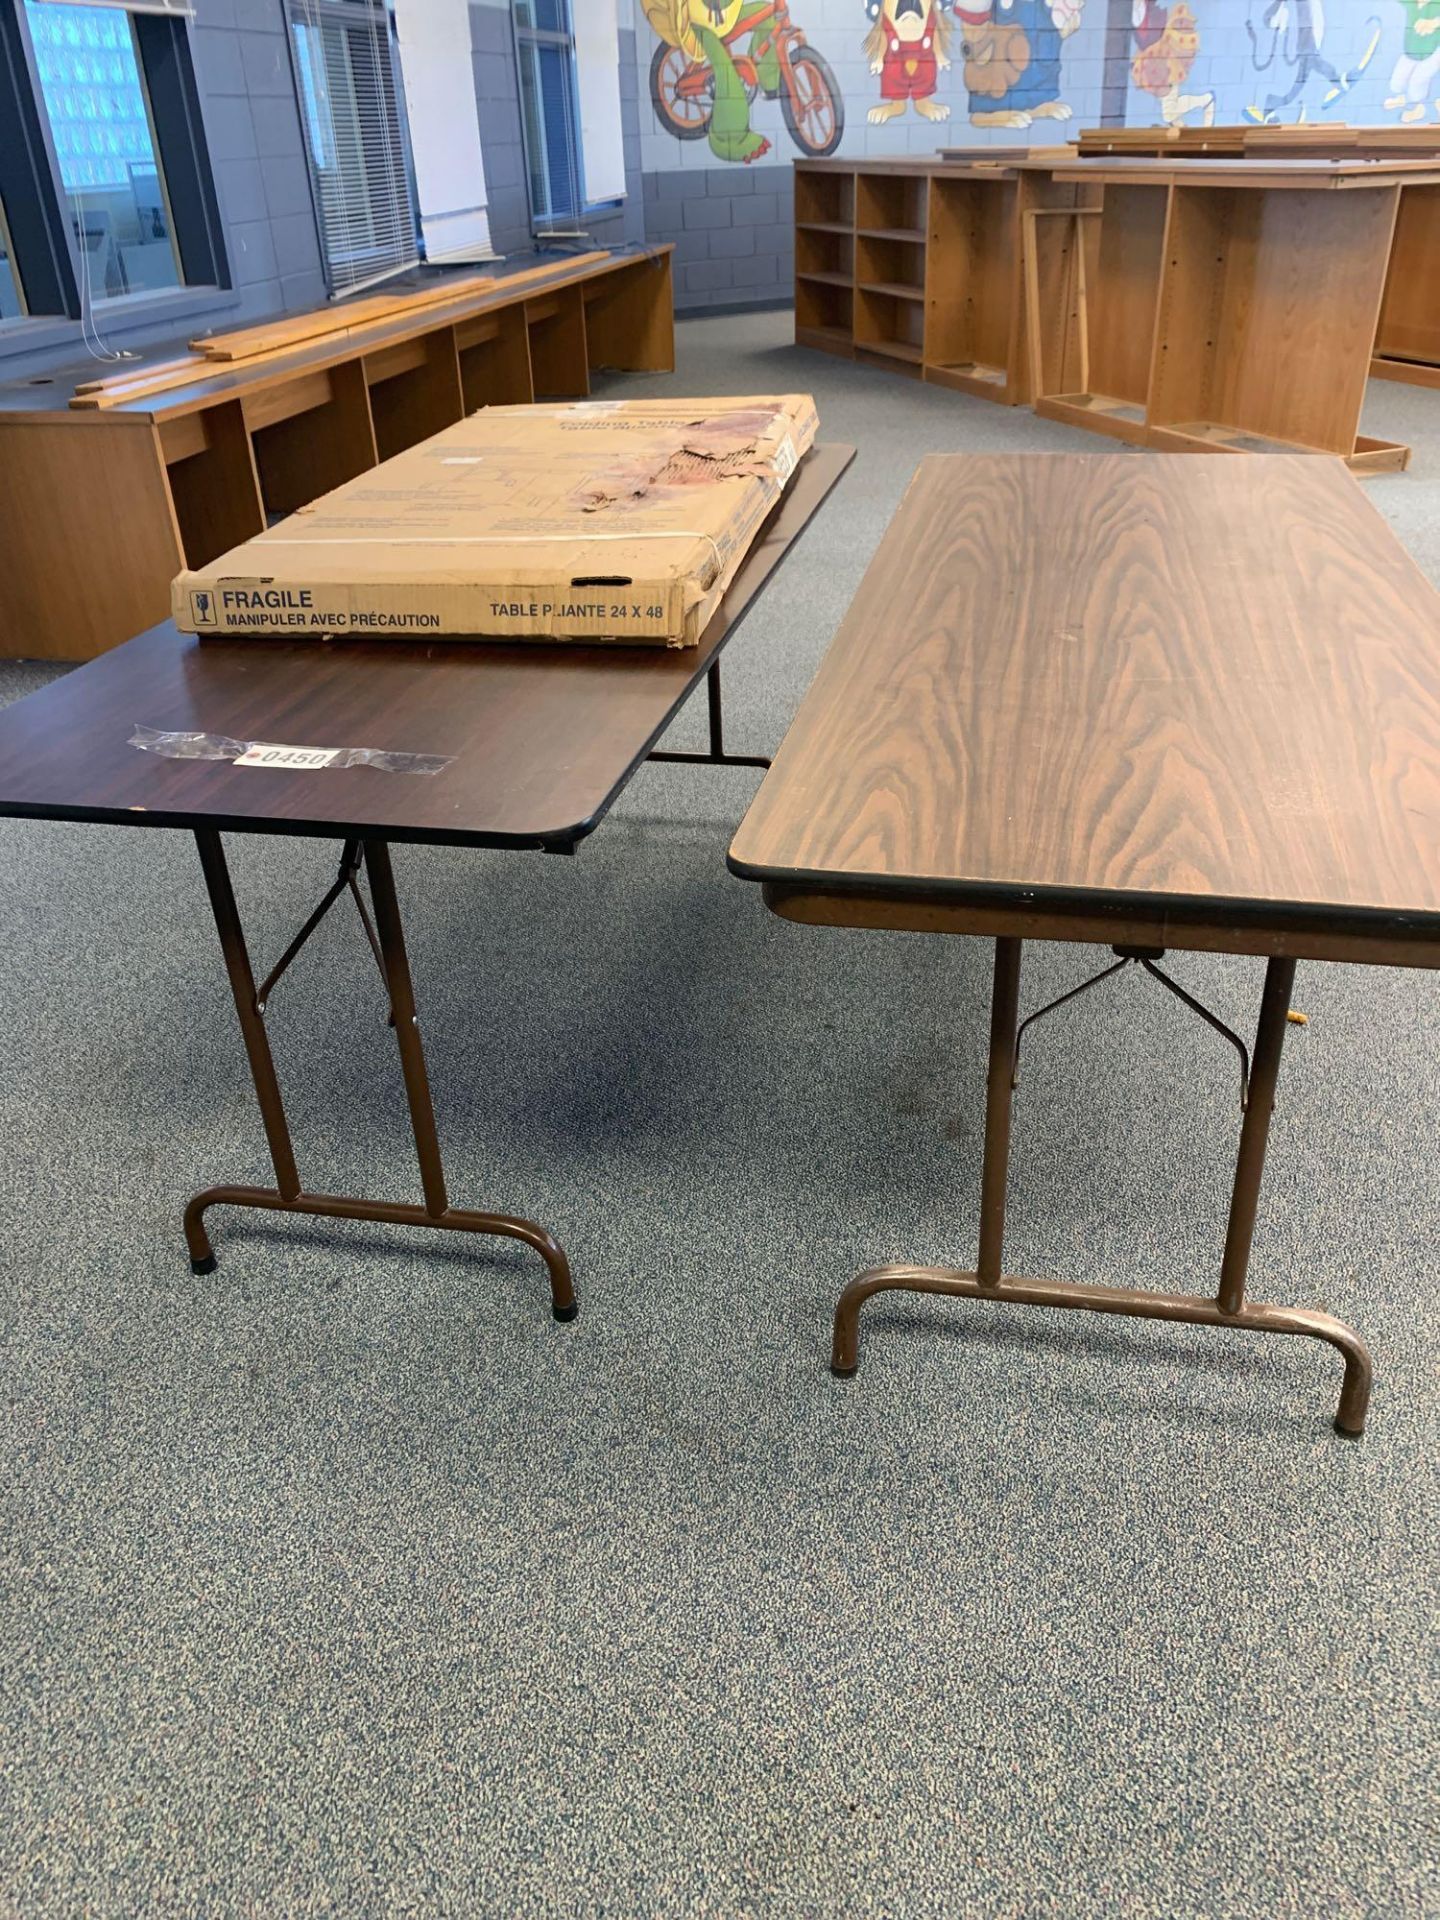 6' (2), 4' (1) Folding Table - Library